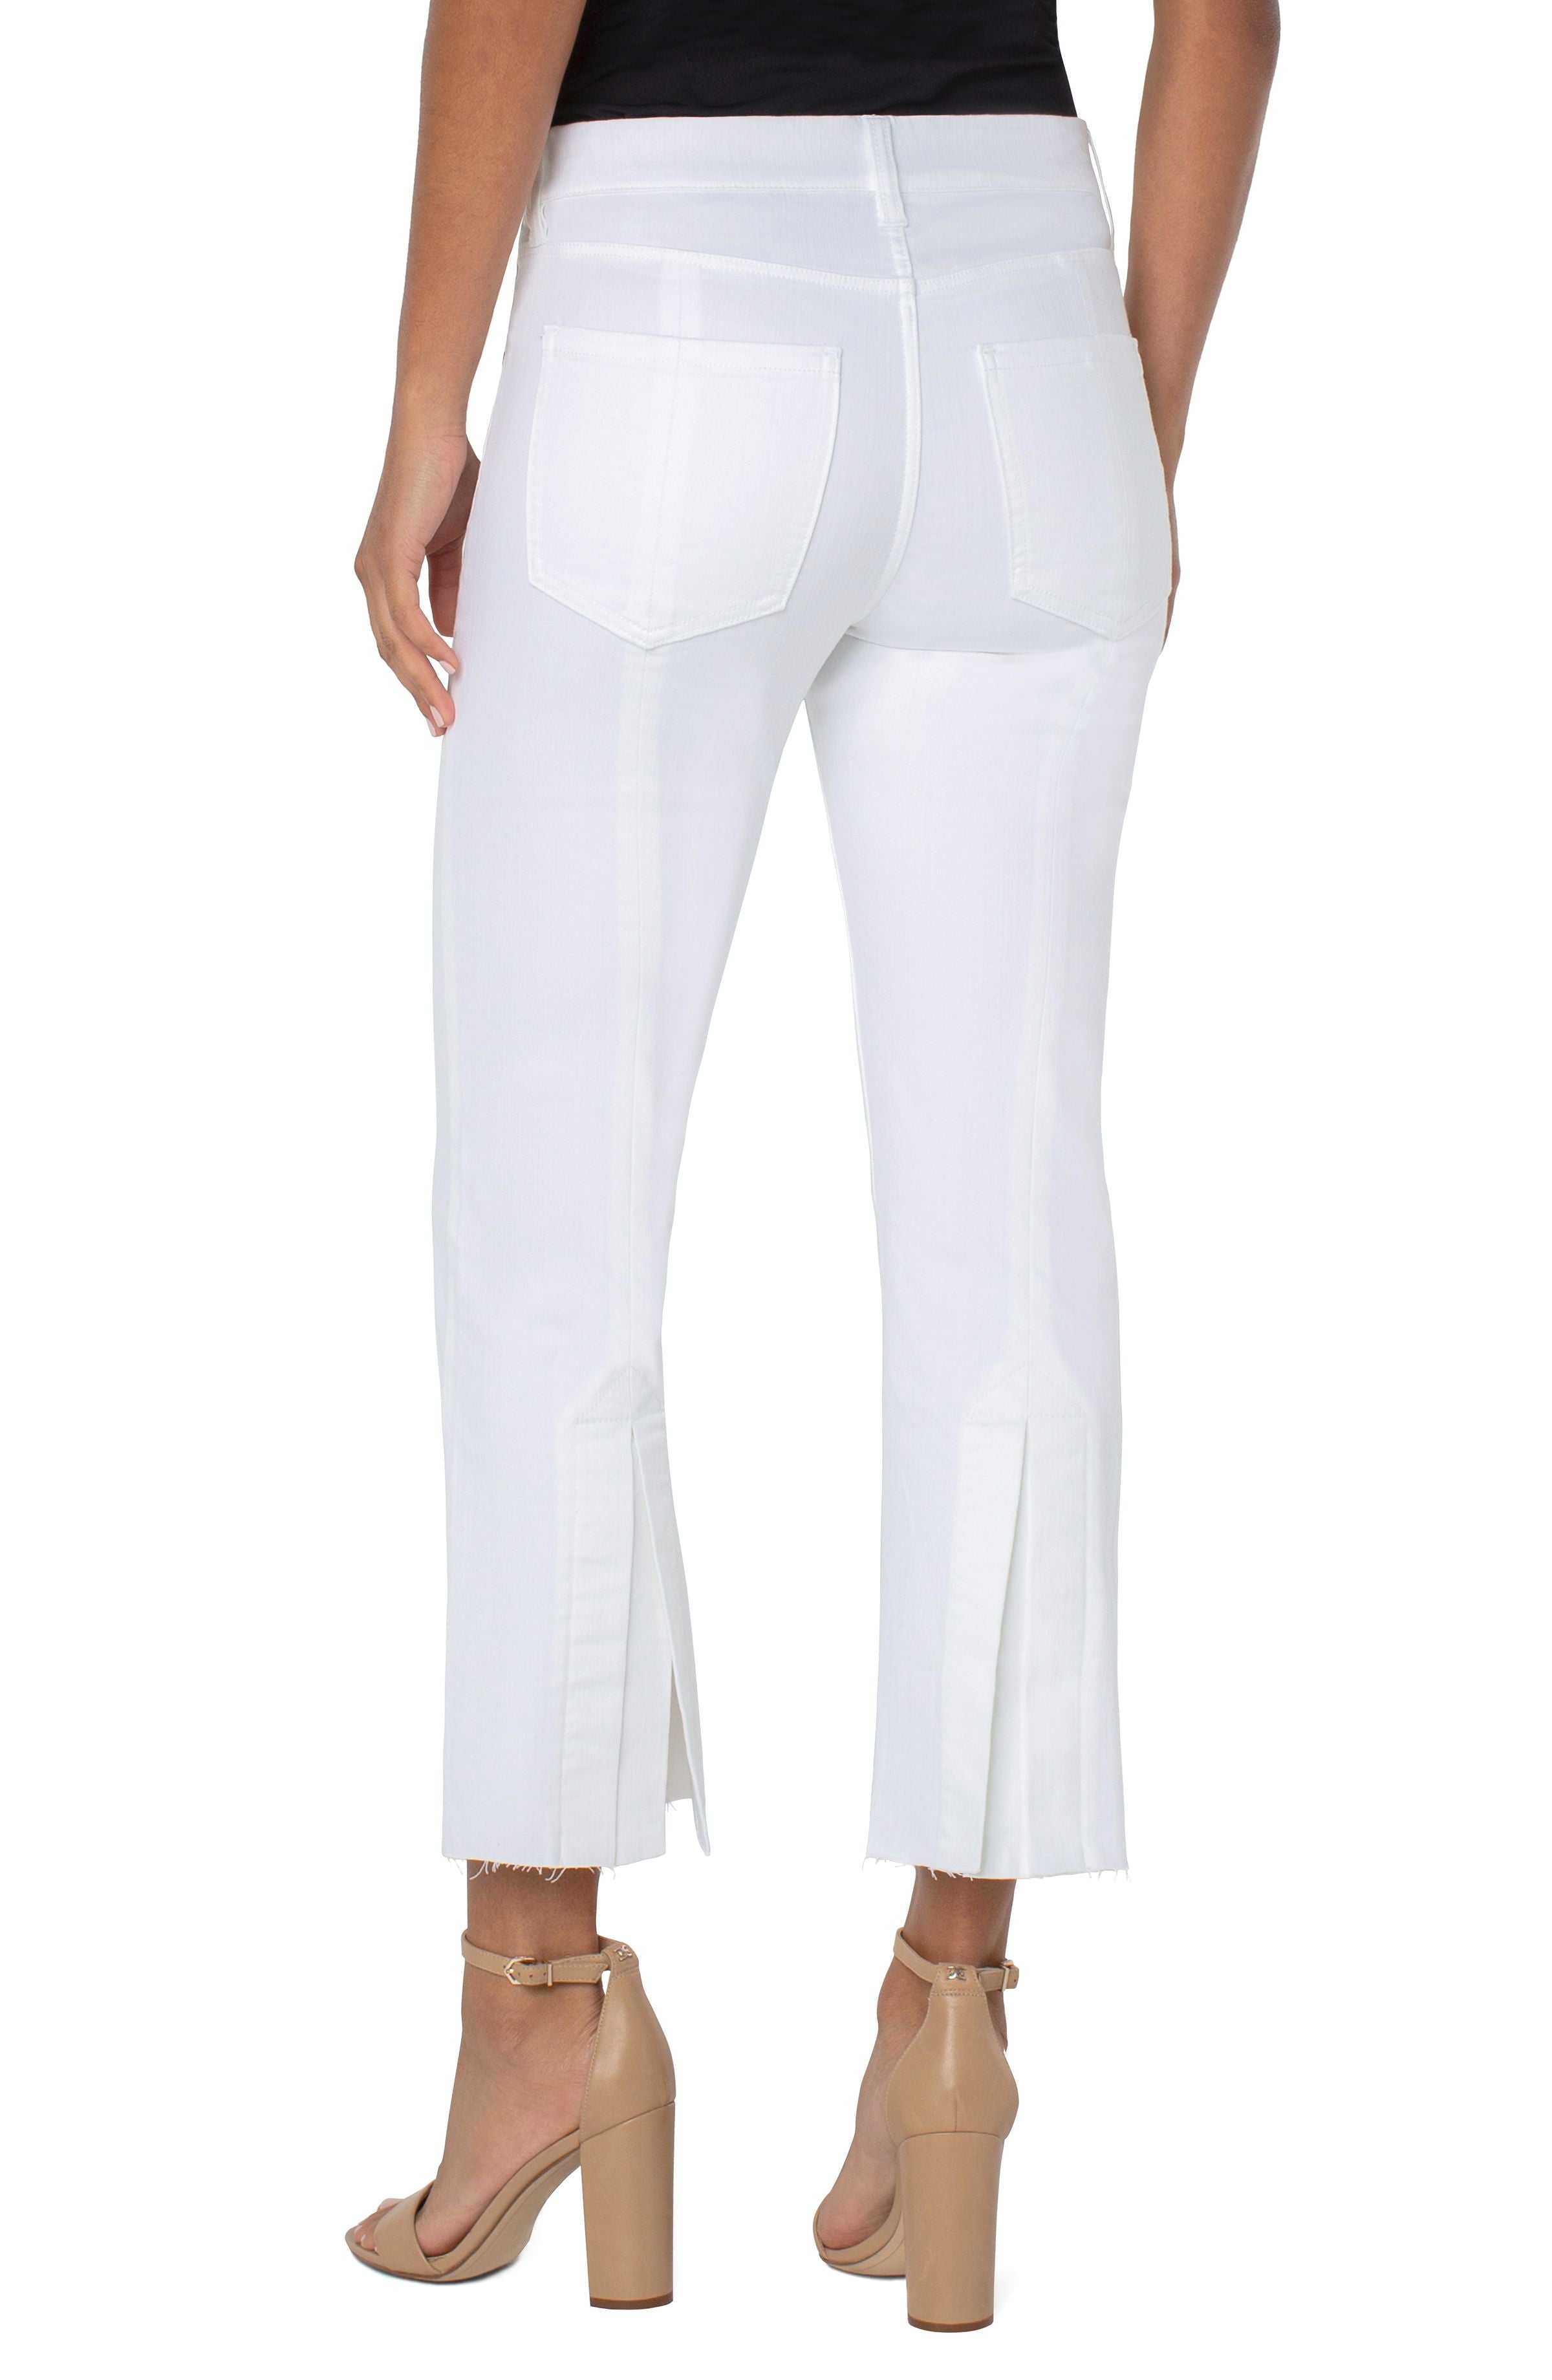 Gia Glider Crop Flare with Back Pleat